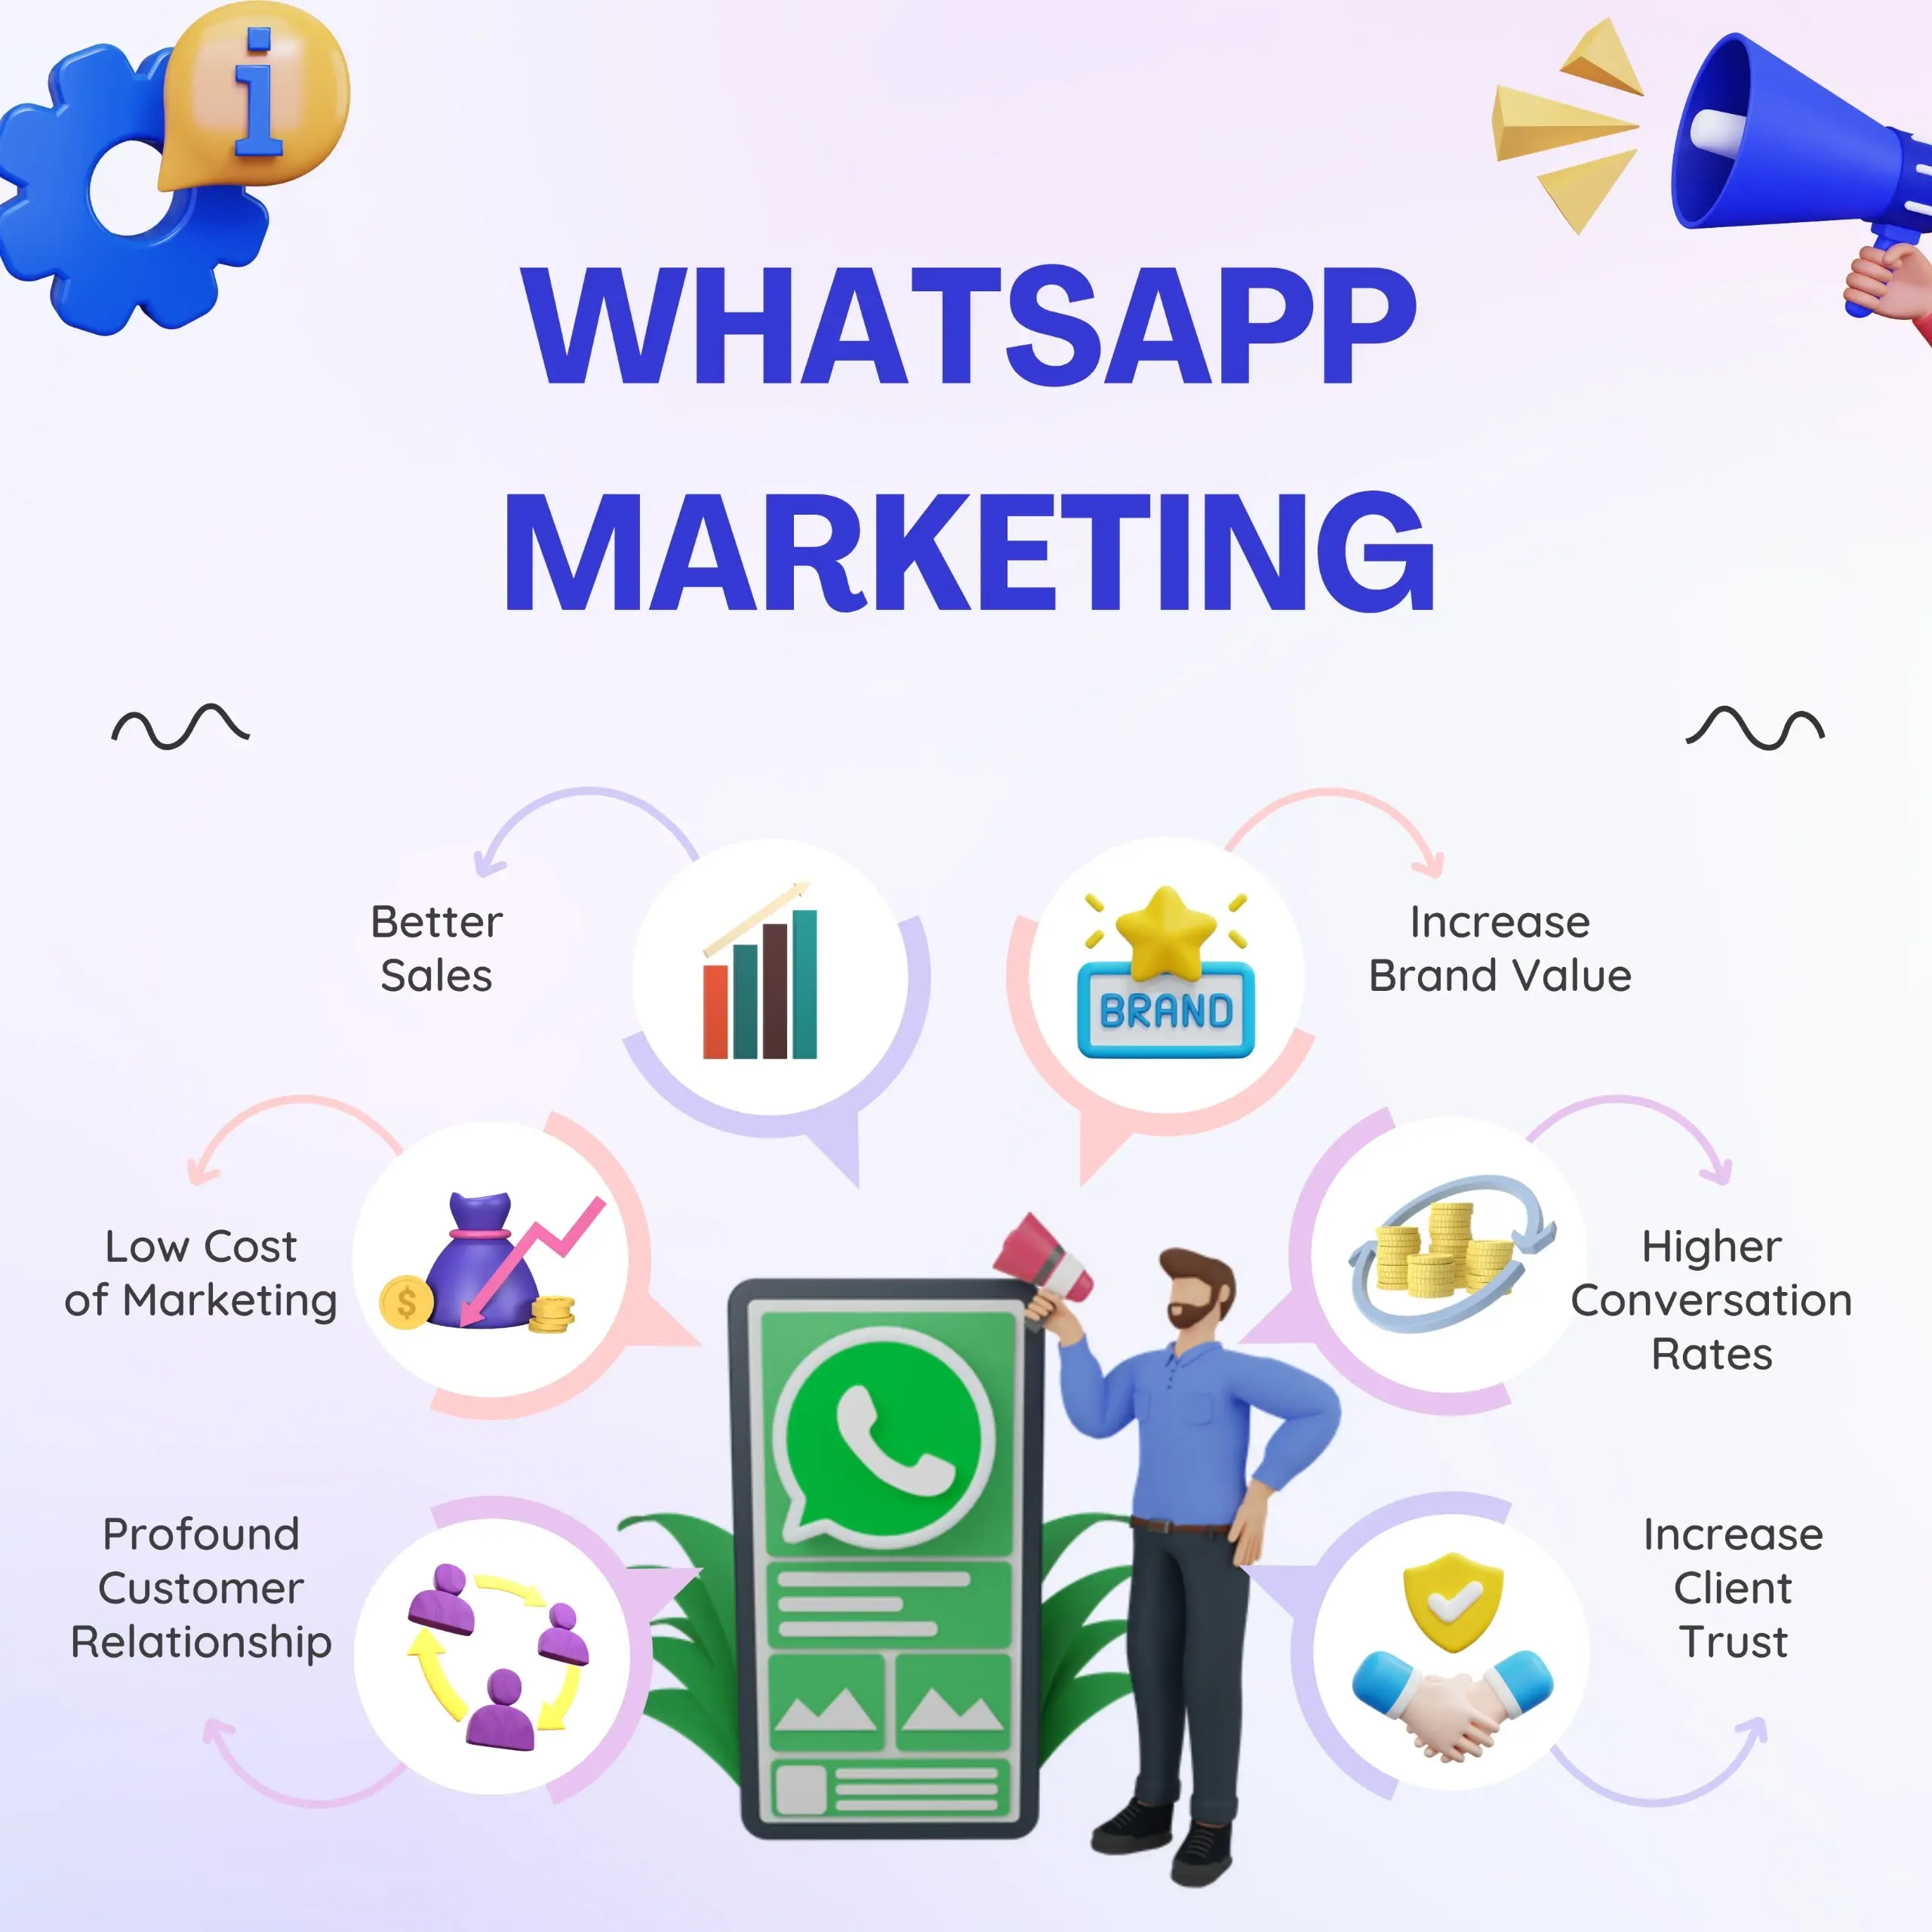 WhatsApp Marketing Services - Boost Your Business on WhatsApp